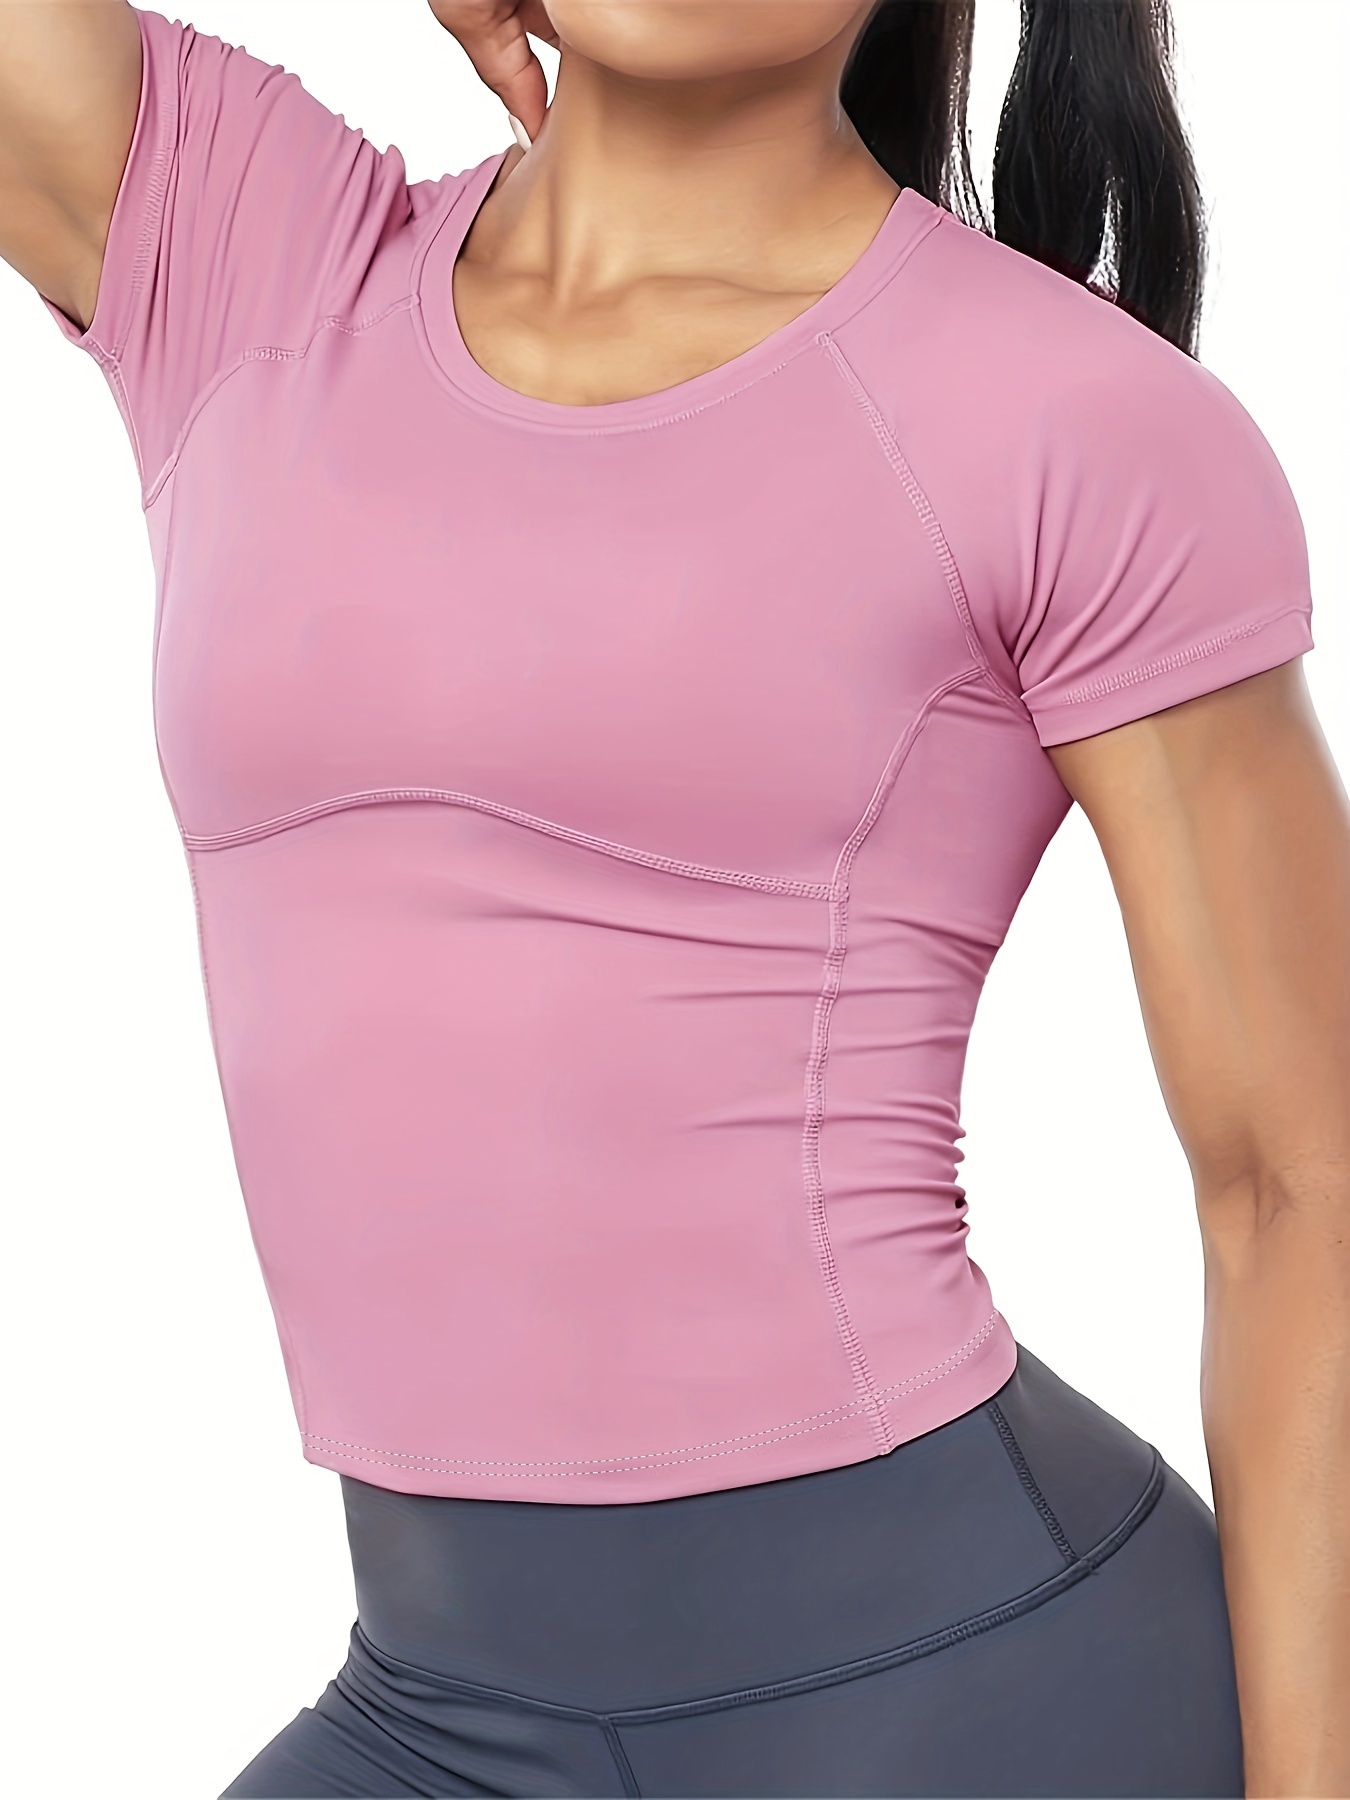 APANA Women Athletic T-Shirt Short Sleeve Casual Solid Light Pink